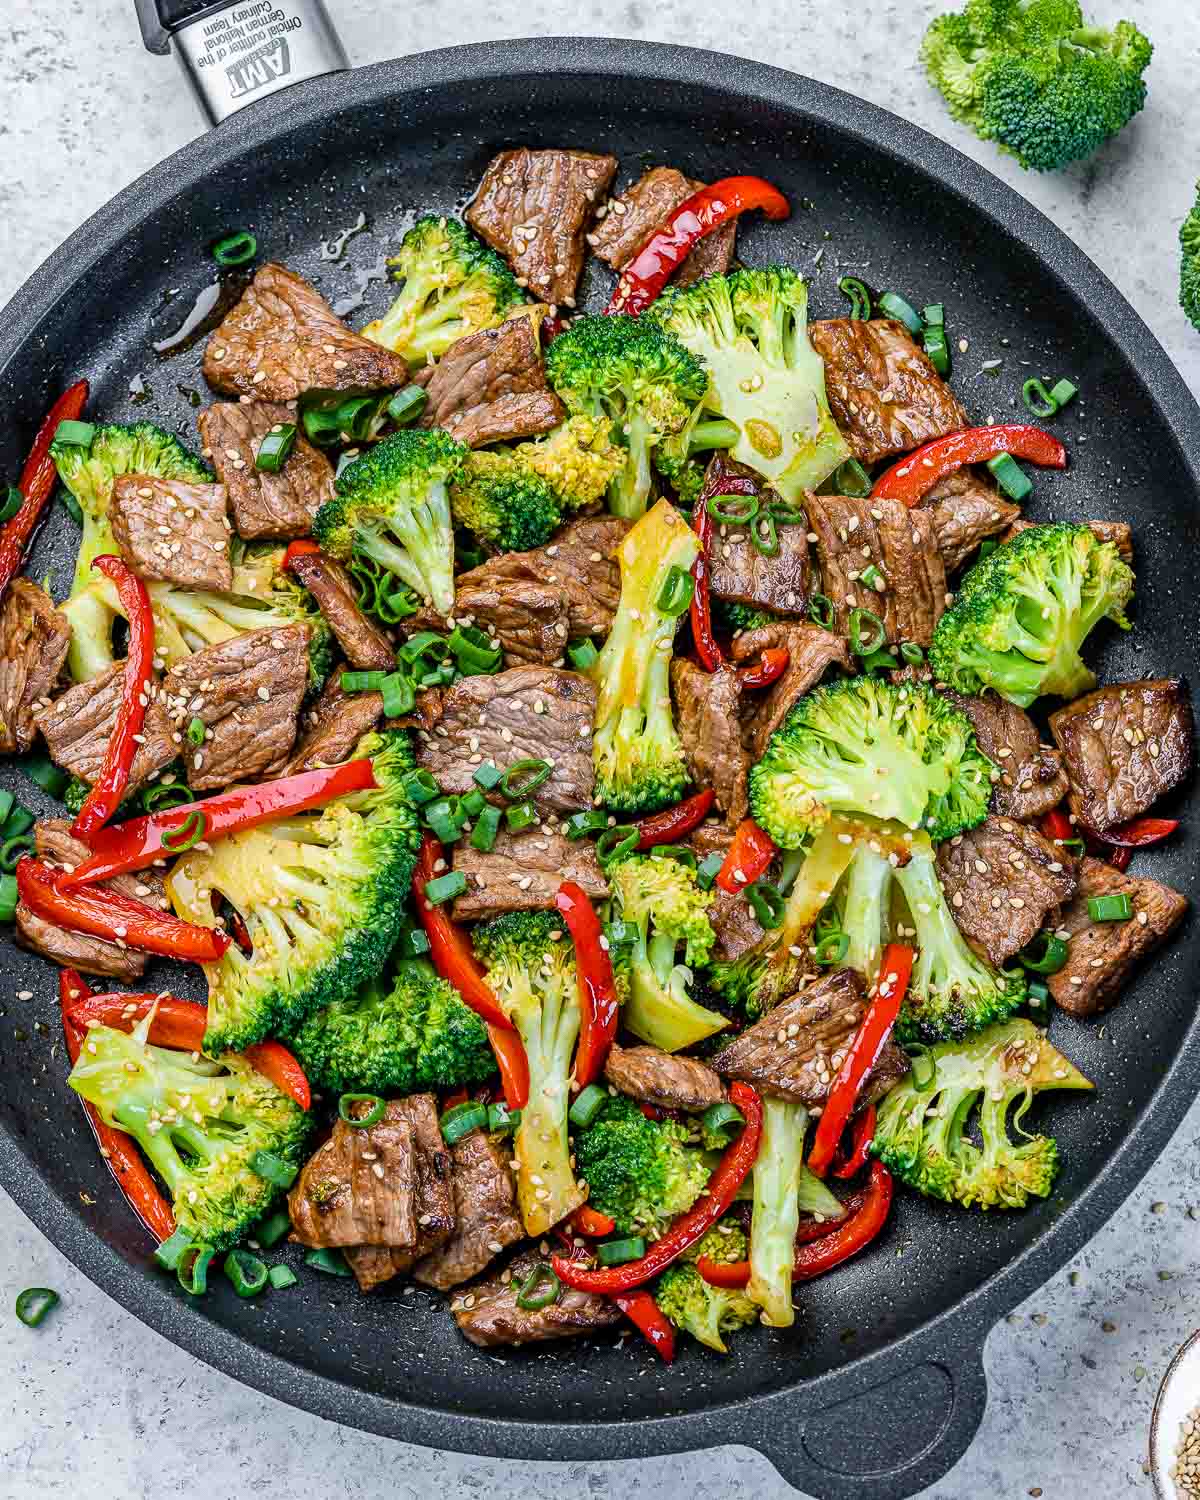 Beef and broccoli stir fry meal prep lunch box containers with